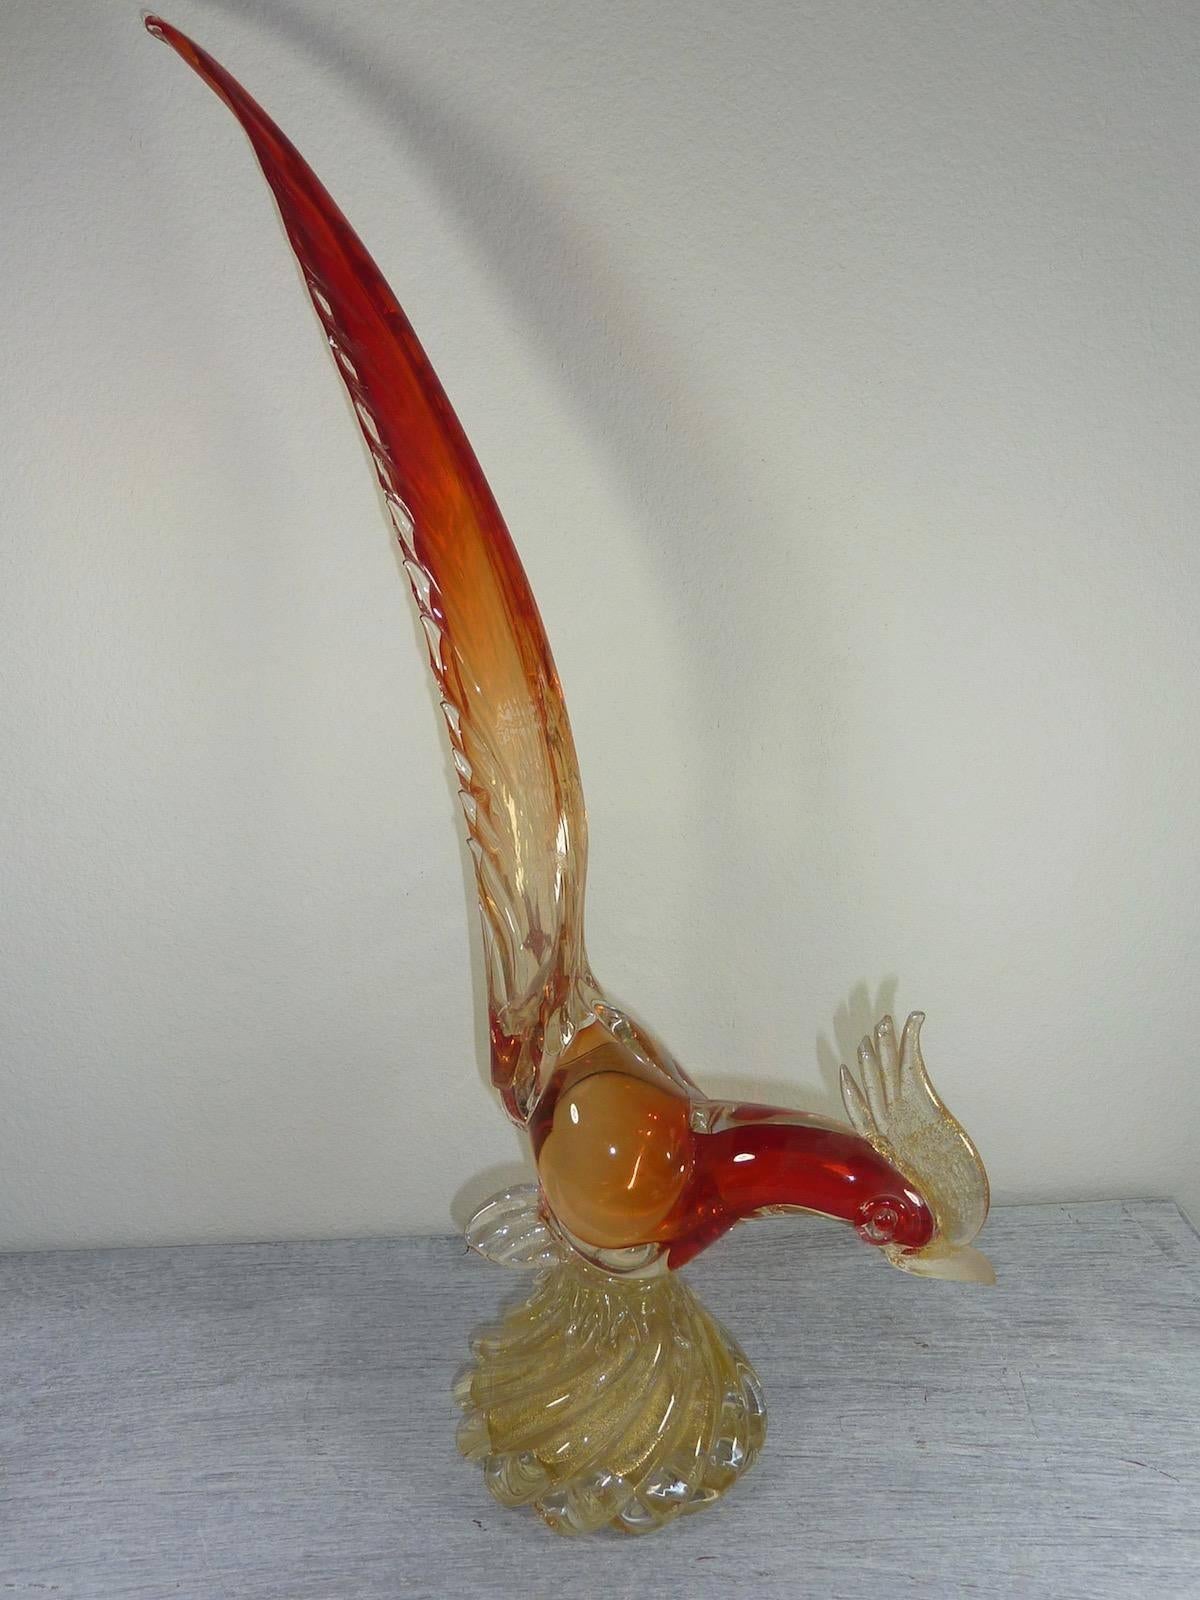 Beautiful handblown Murano glass bird. Made of multiple colors including red, orange, and clear glass. With golden flakes inside. Made on the Isle of Murano in Venice, Italy.